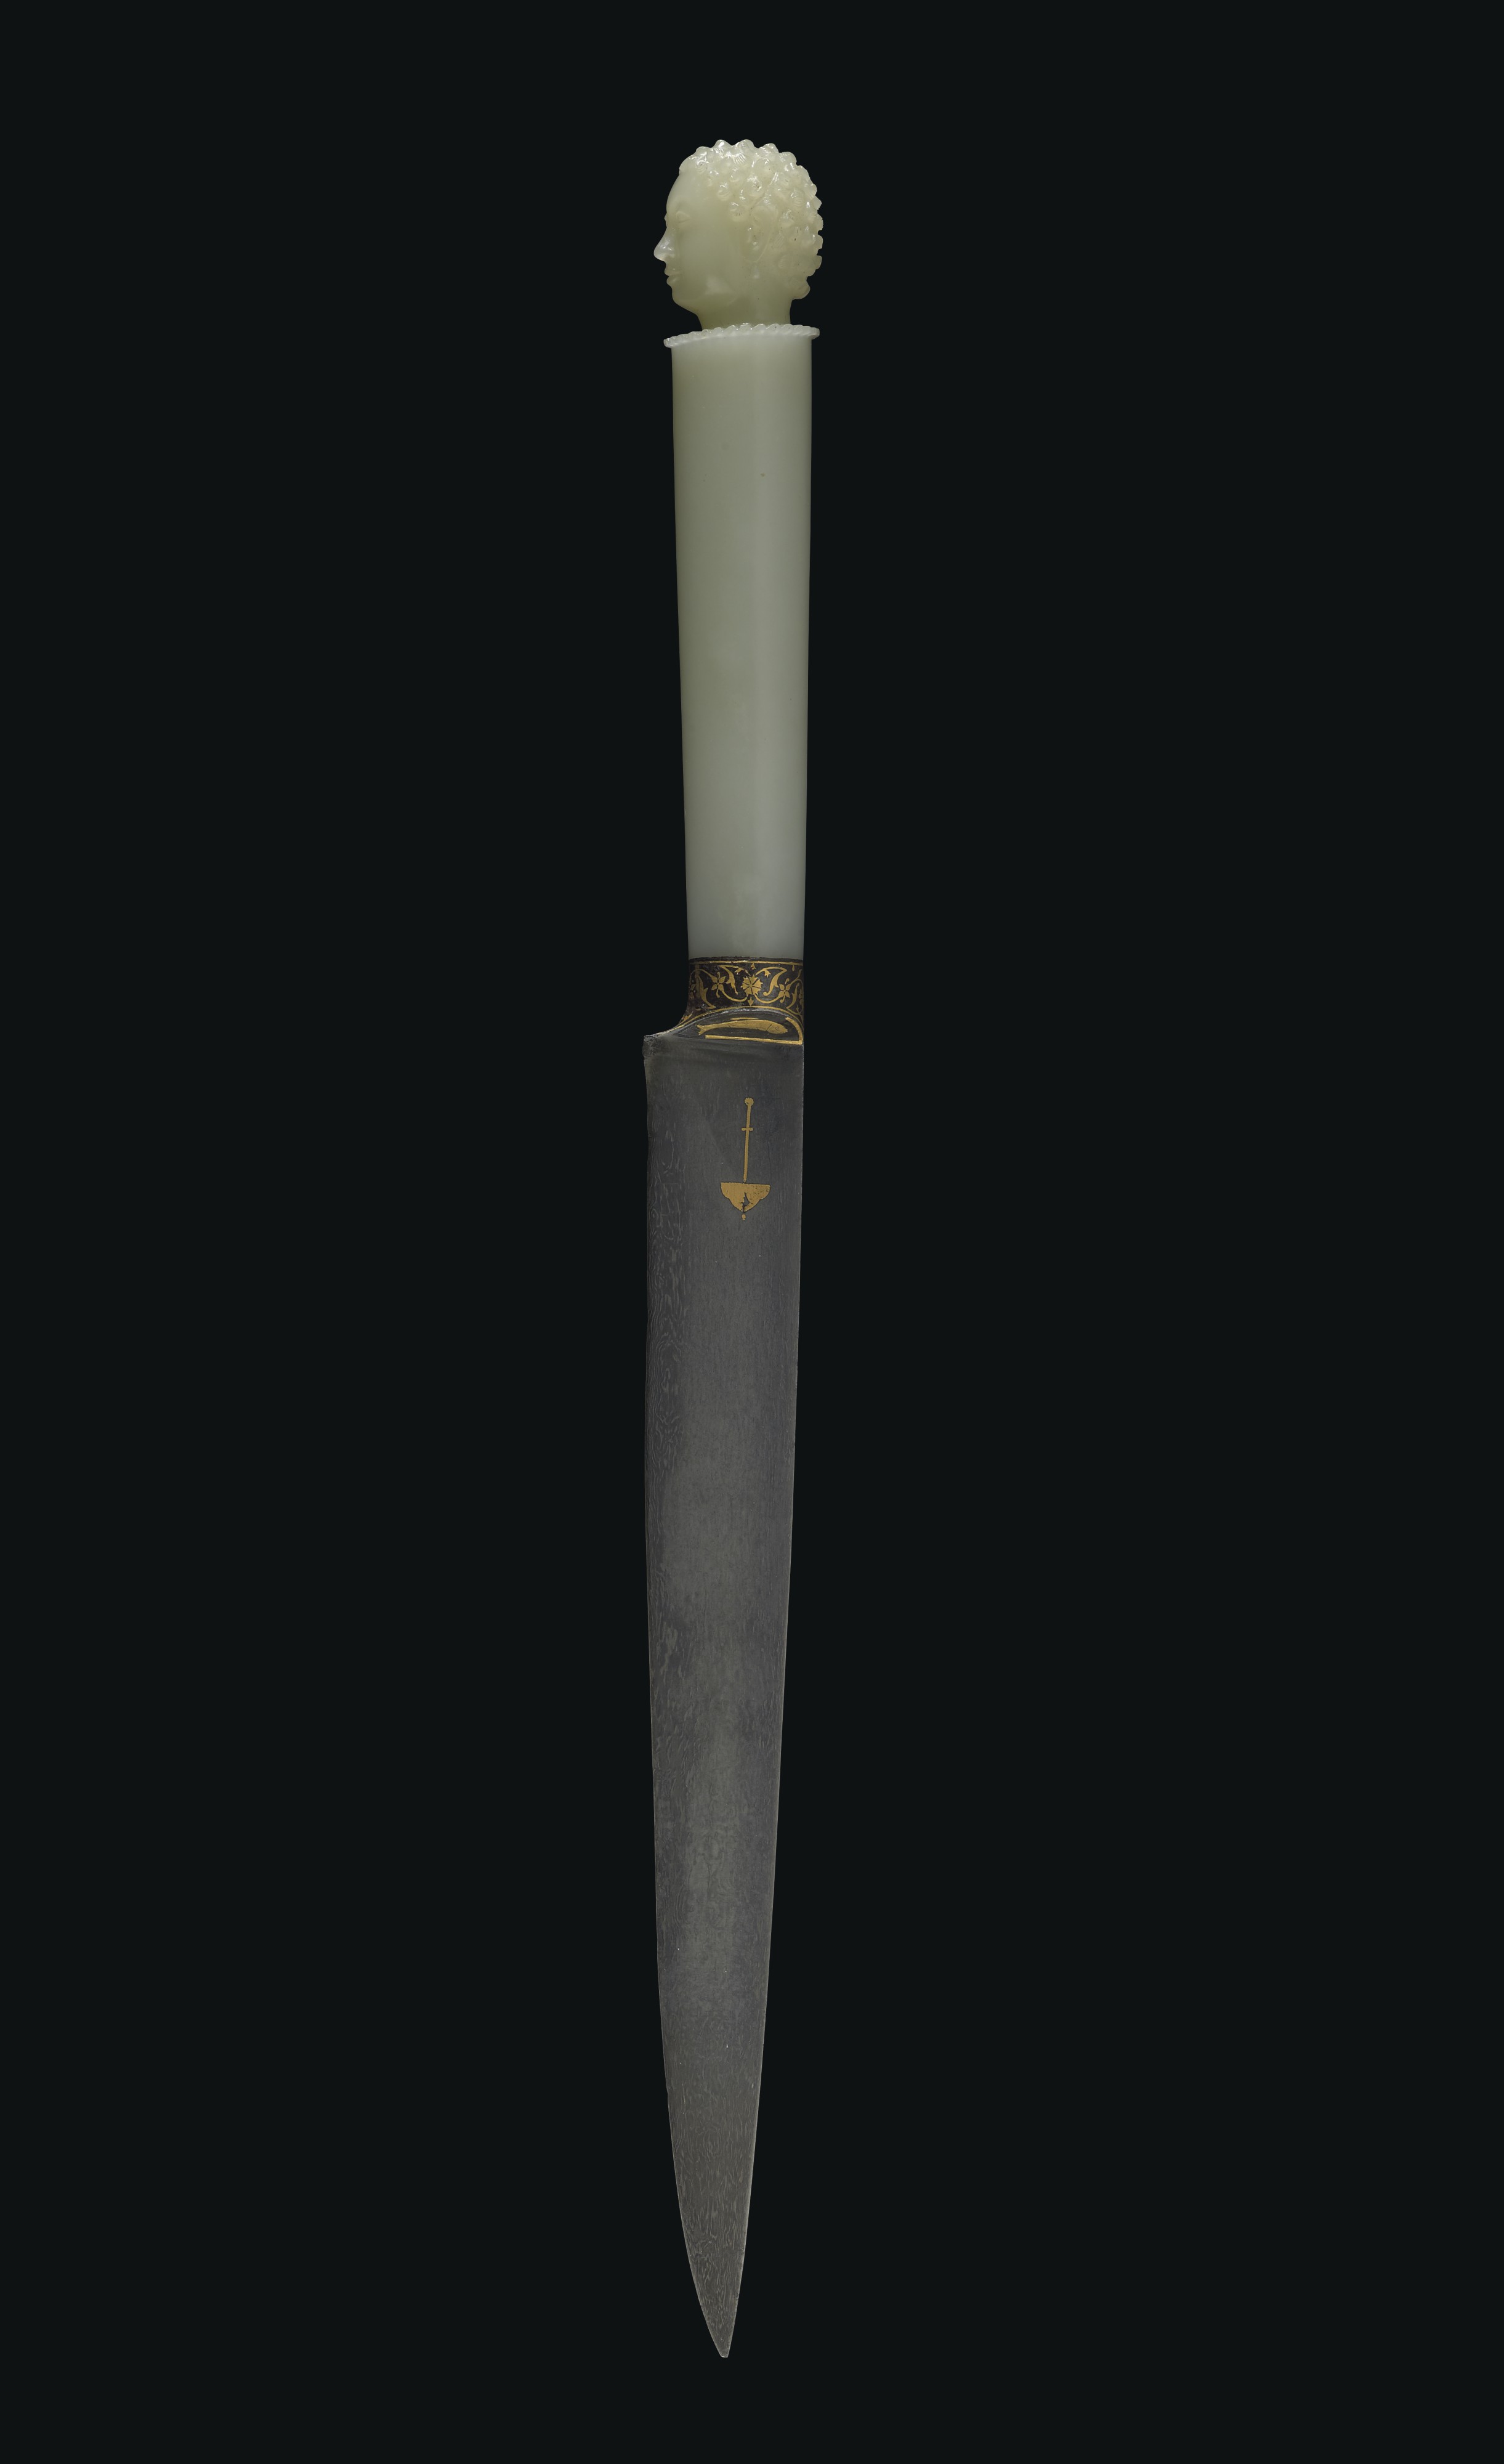 The Shah Jahan Dagger with a carved jade hilt and a watered-steel blade was created between 1620-1630. It sold for $3,375,000, establishing the record price for an Indian jade object and record for a piece with Shah Jahan provenance